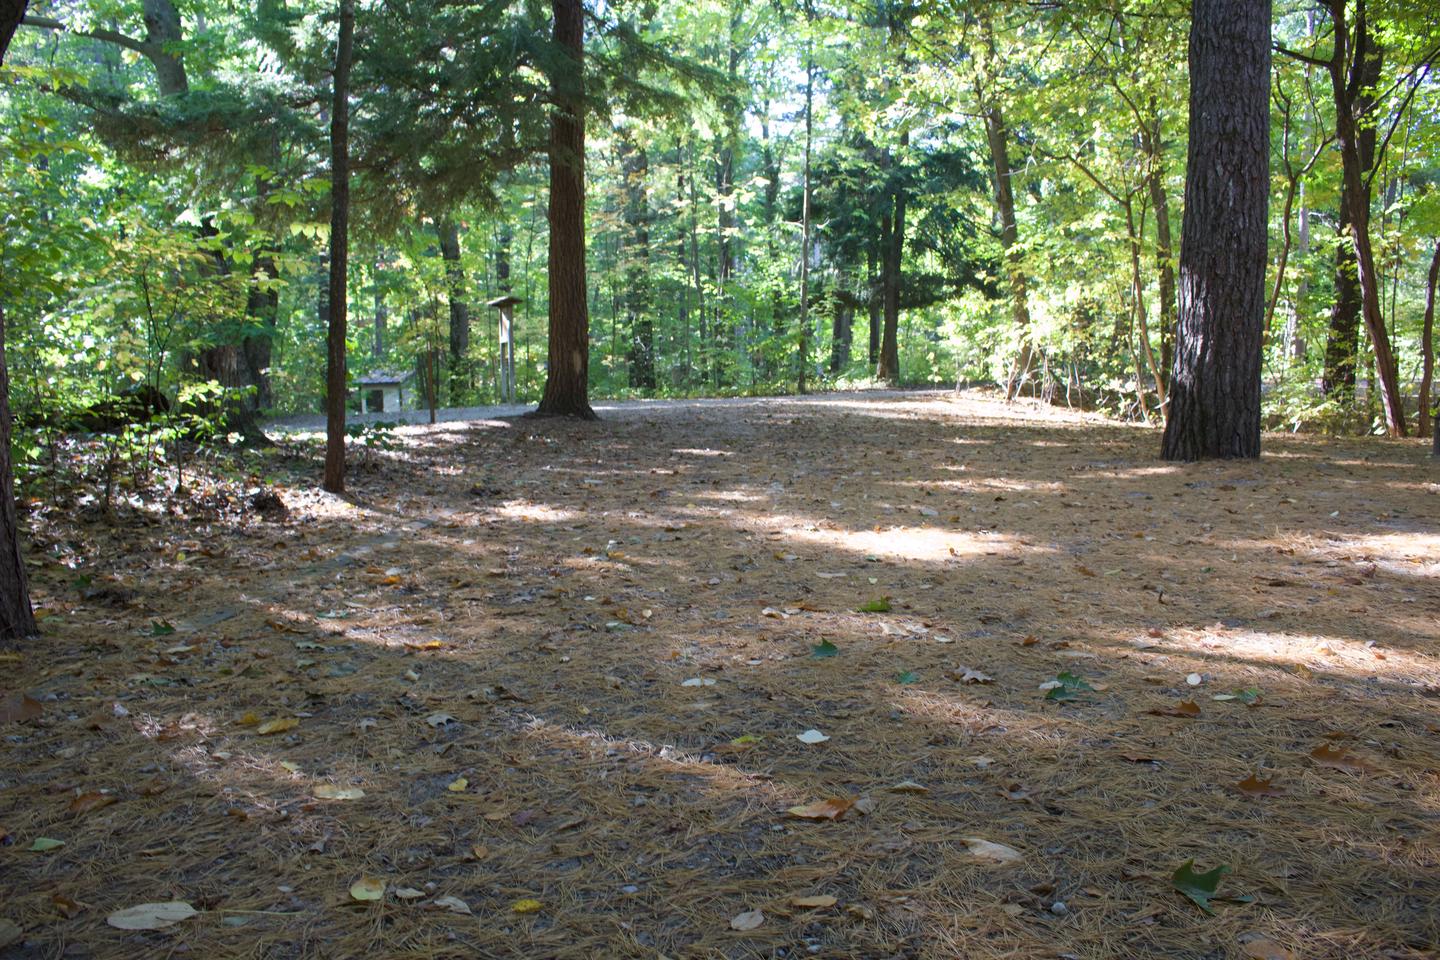 Campsite #79, view from the site toward the amphitheater and road